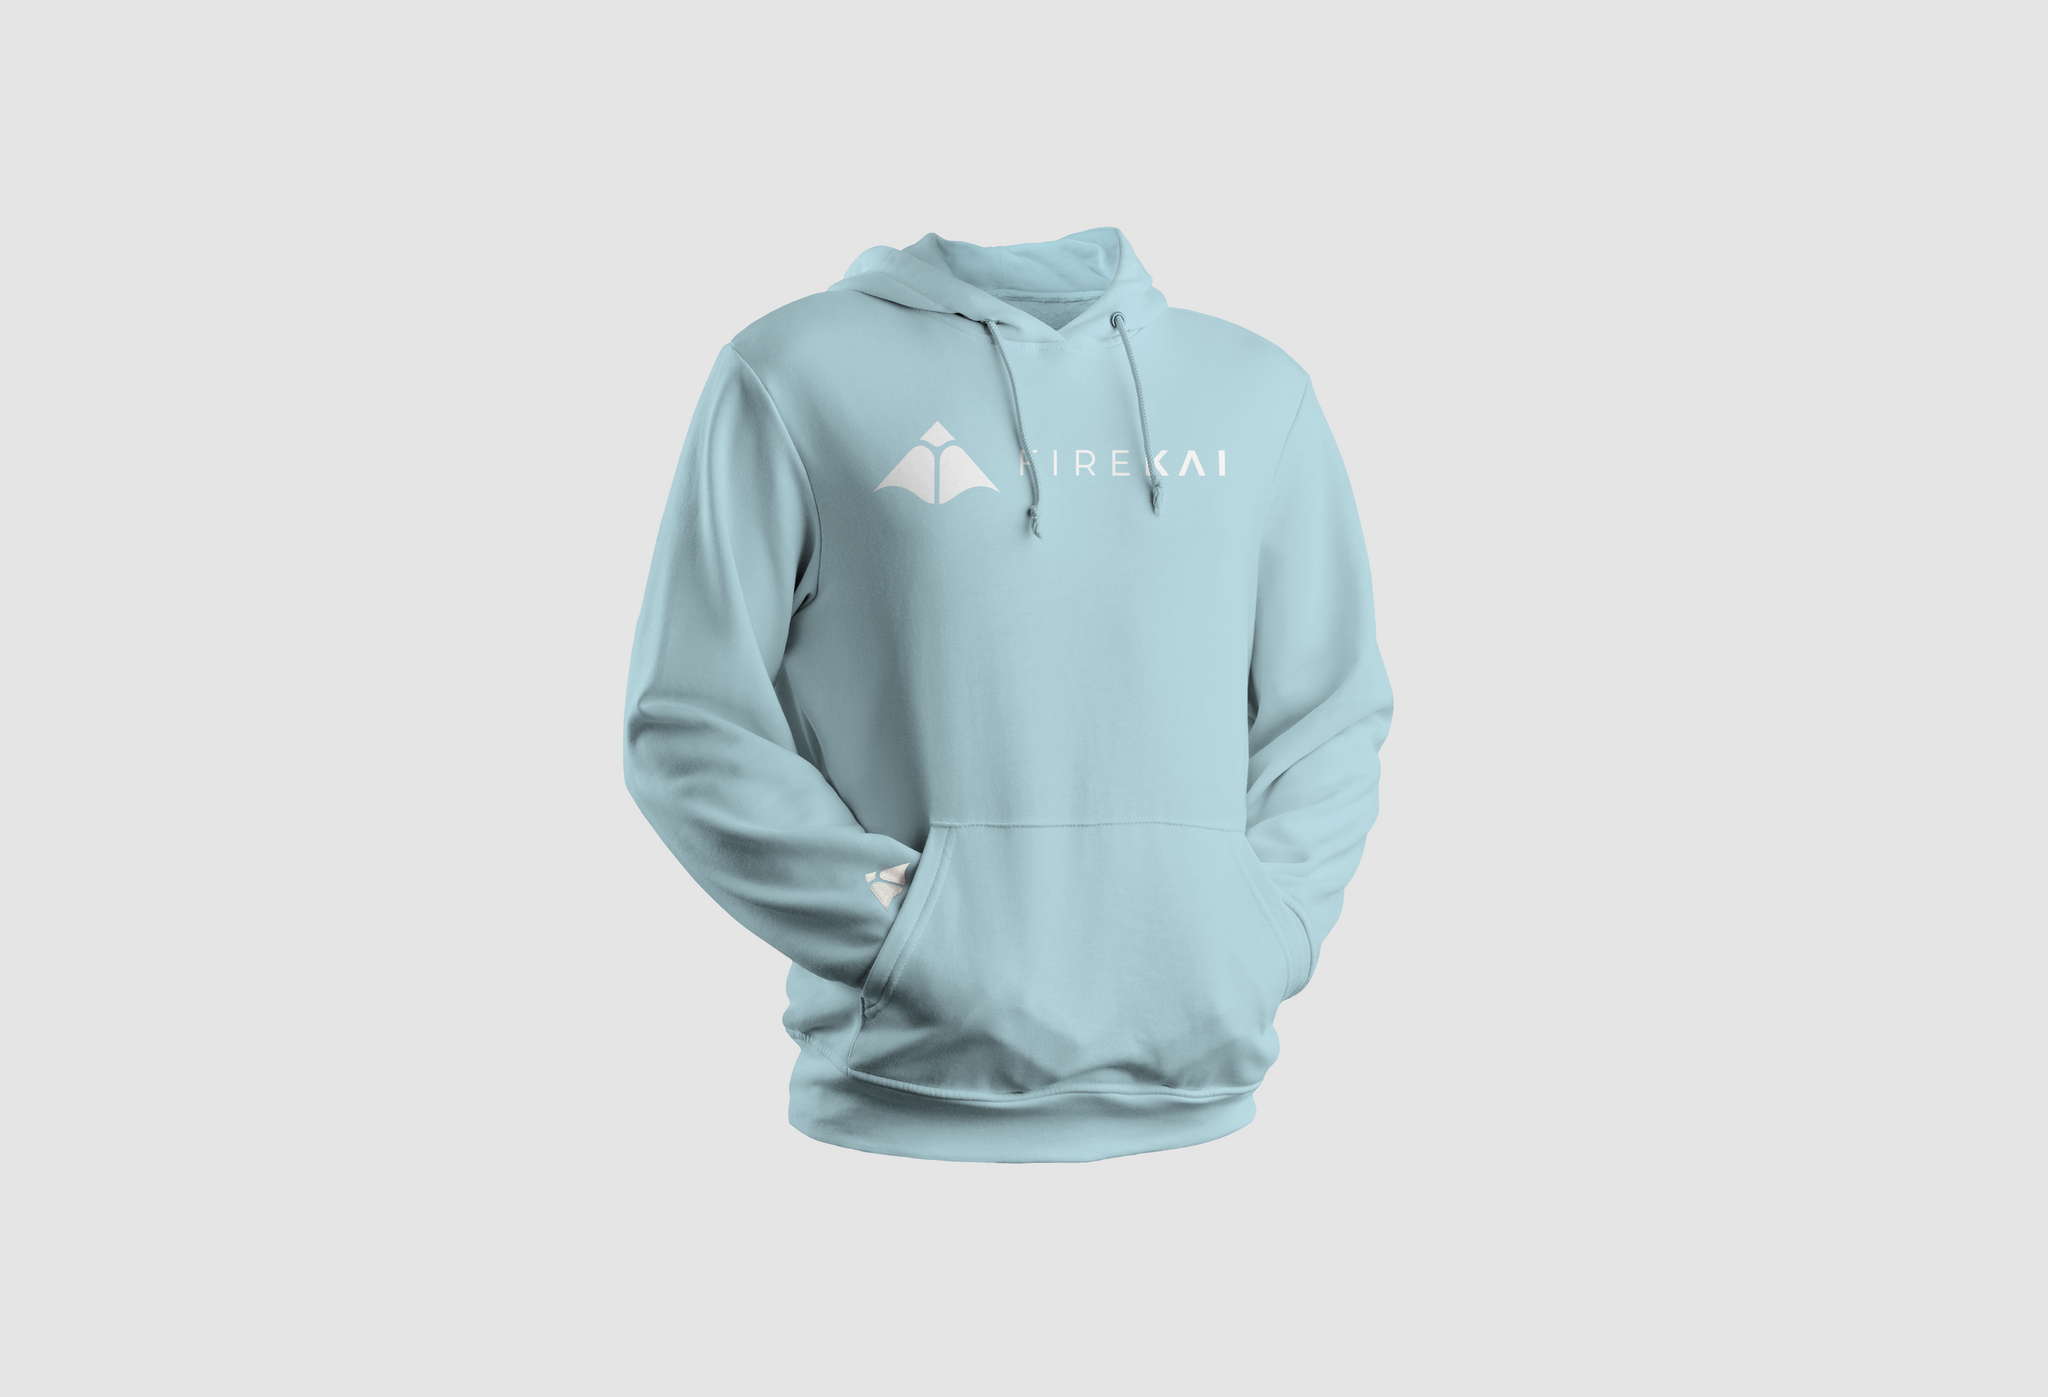 Fire Kai Rugged Hoodie Blue Hands in Pockets